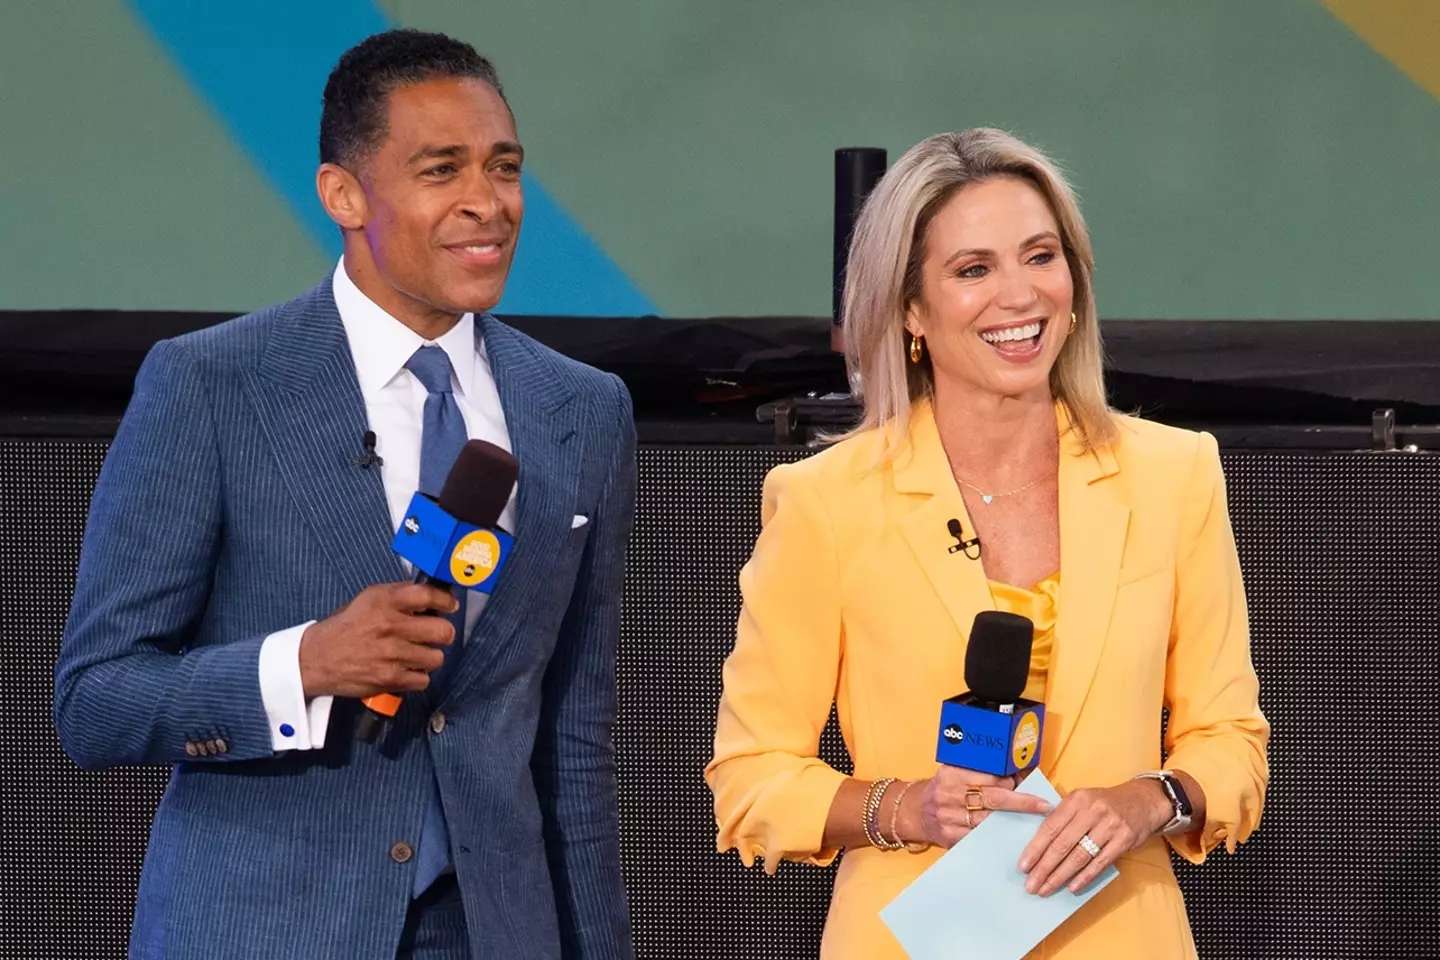 Amy Robach and T.J Holmes have been removed from their anchoring duties at ABC News’ GMA3.